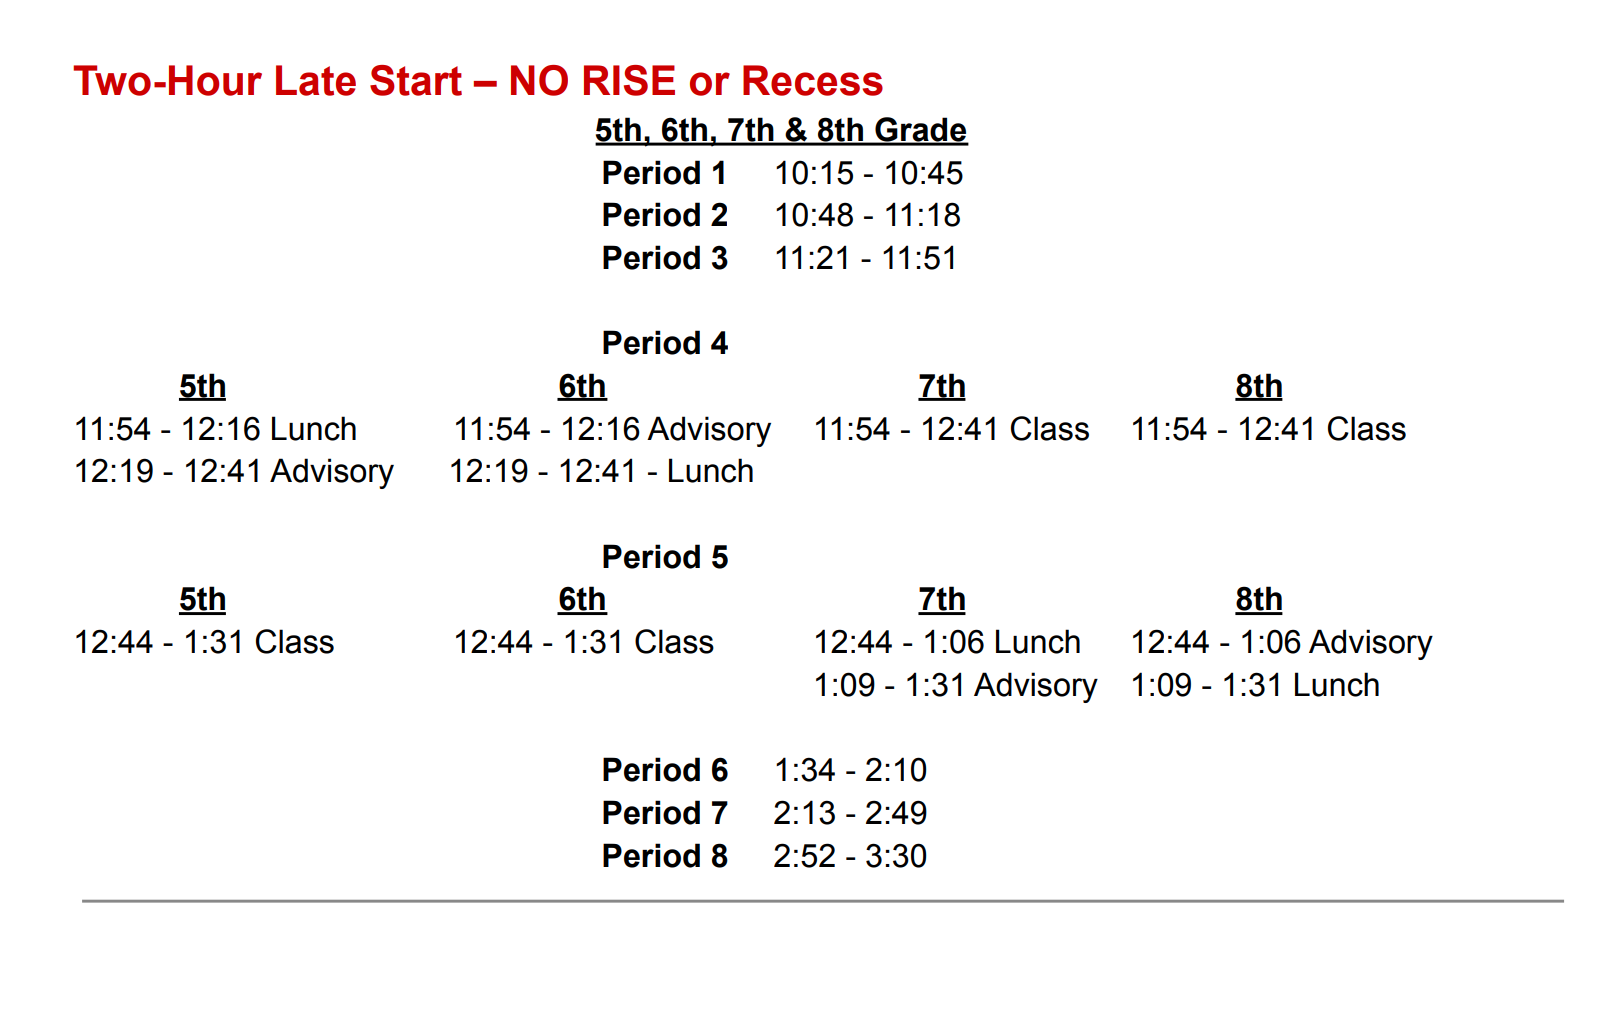 Two Hour Late Start Schedule